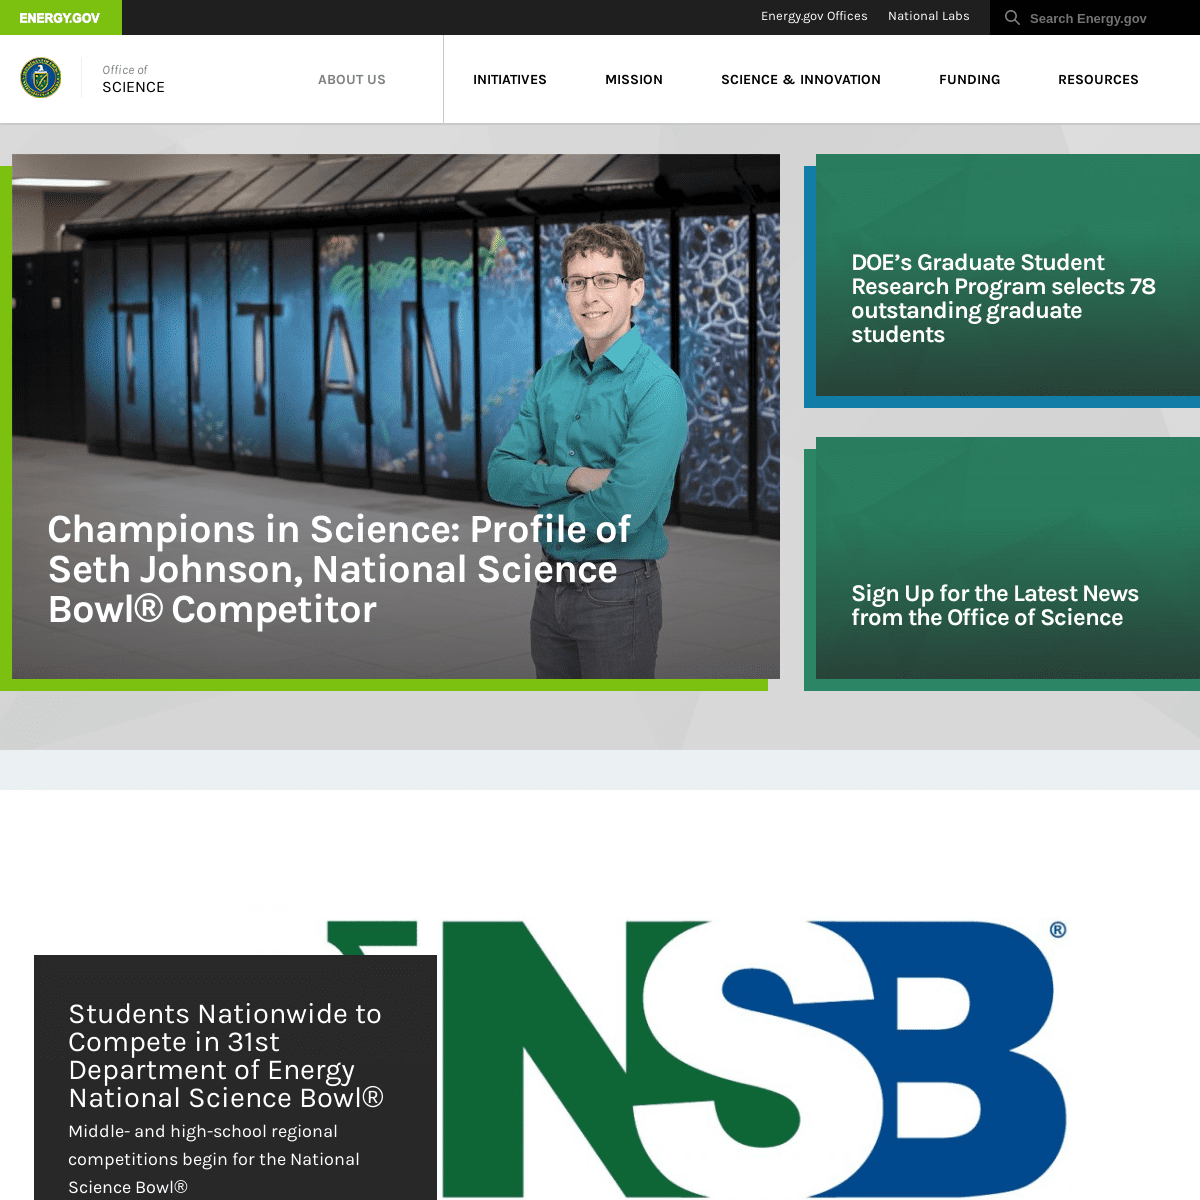 A complete backup of https://www.energy.gov/science/office-science